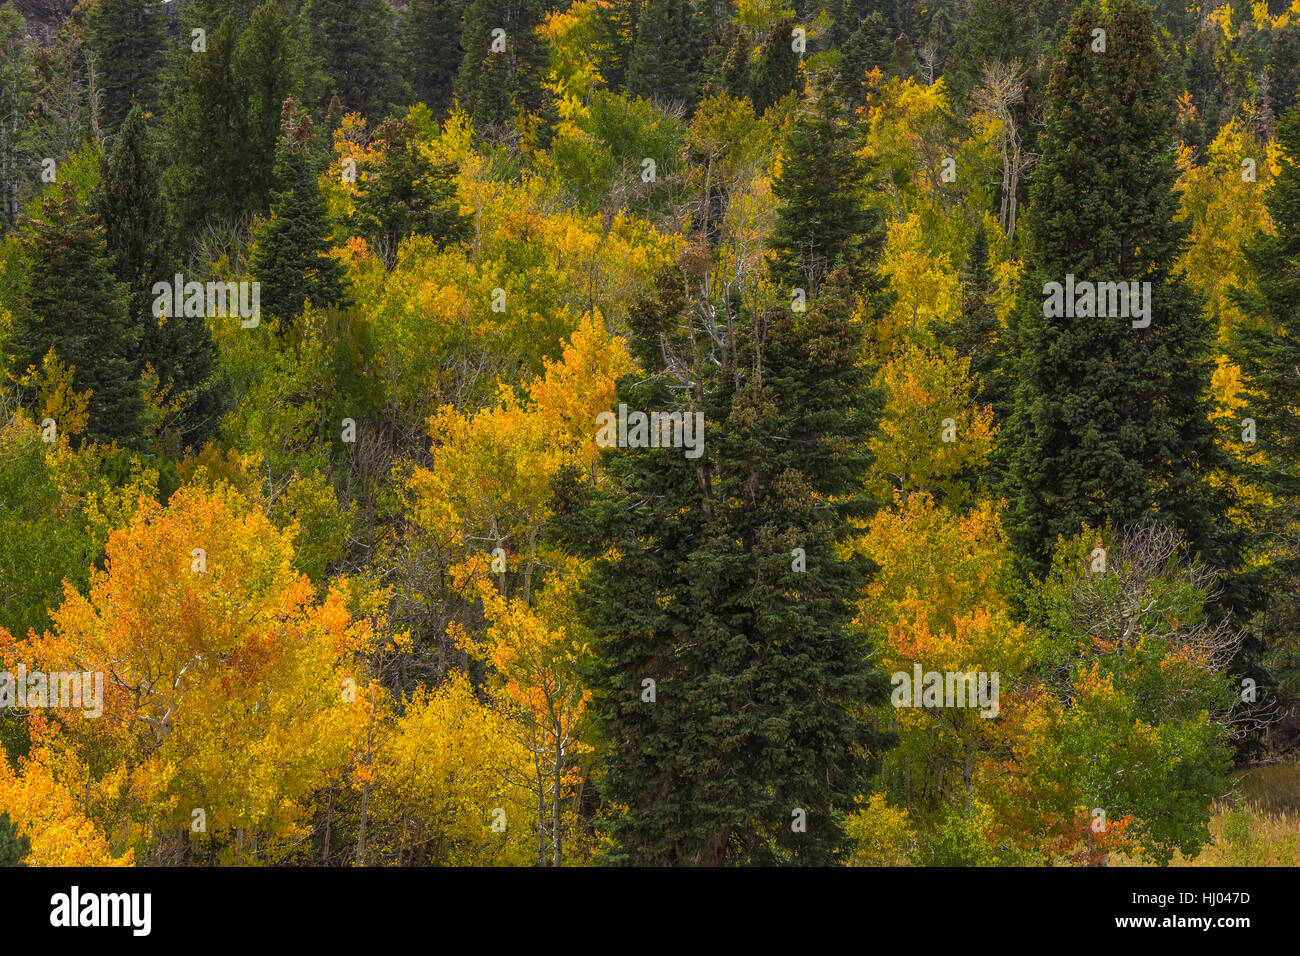 Autumn forest of White Fir, Abies concolor, and Trembling Aspen, Populus tremuloides, in Great Basin National Park, Nevada, USA Stock Photo